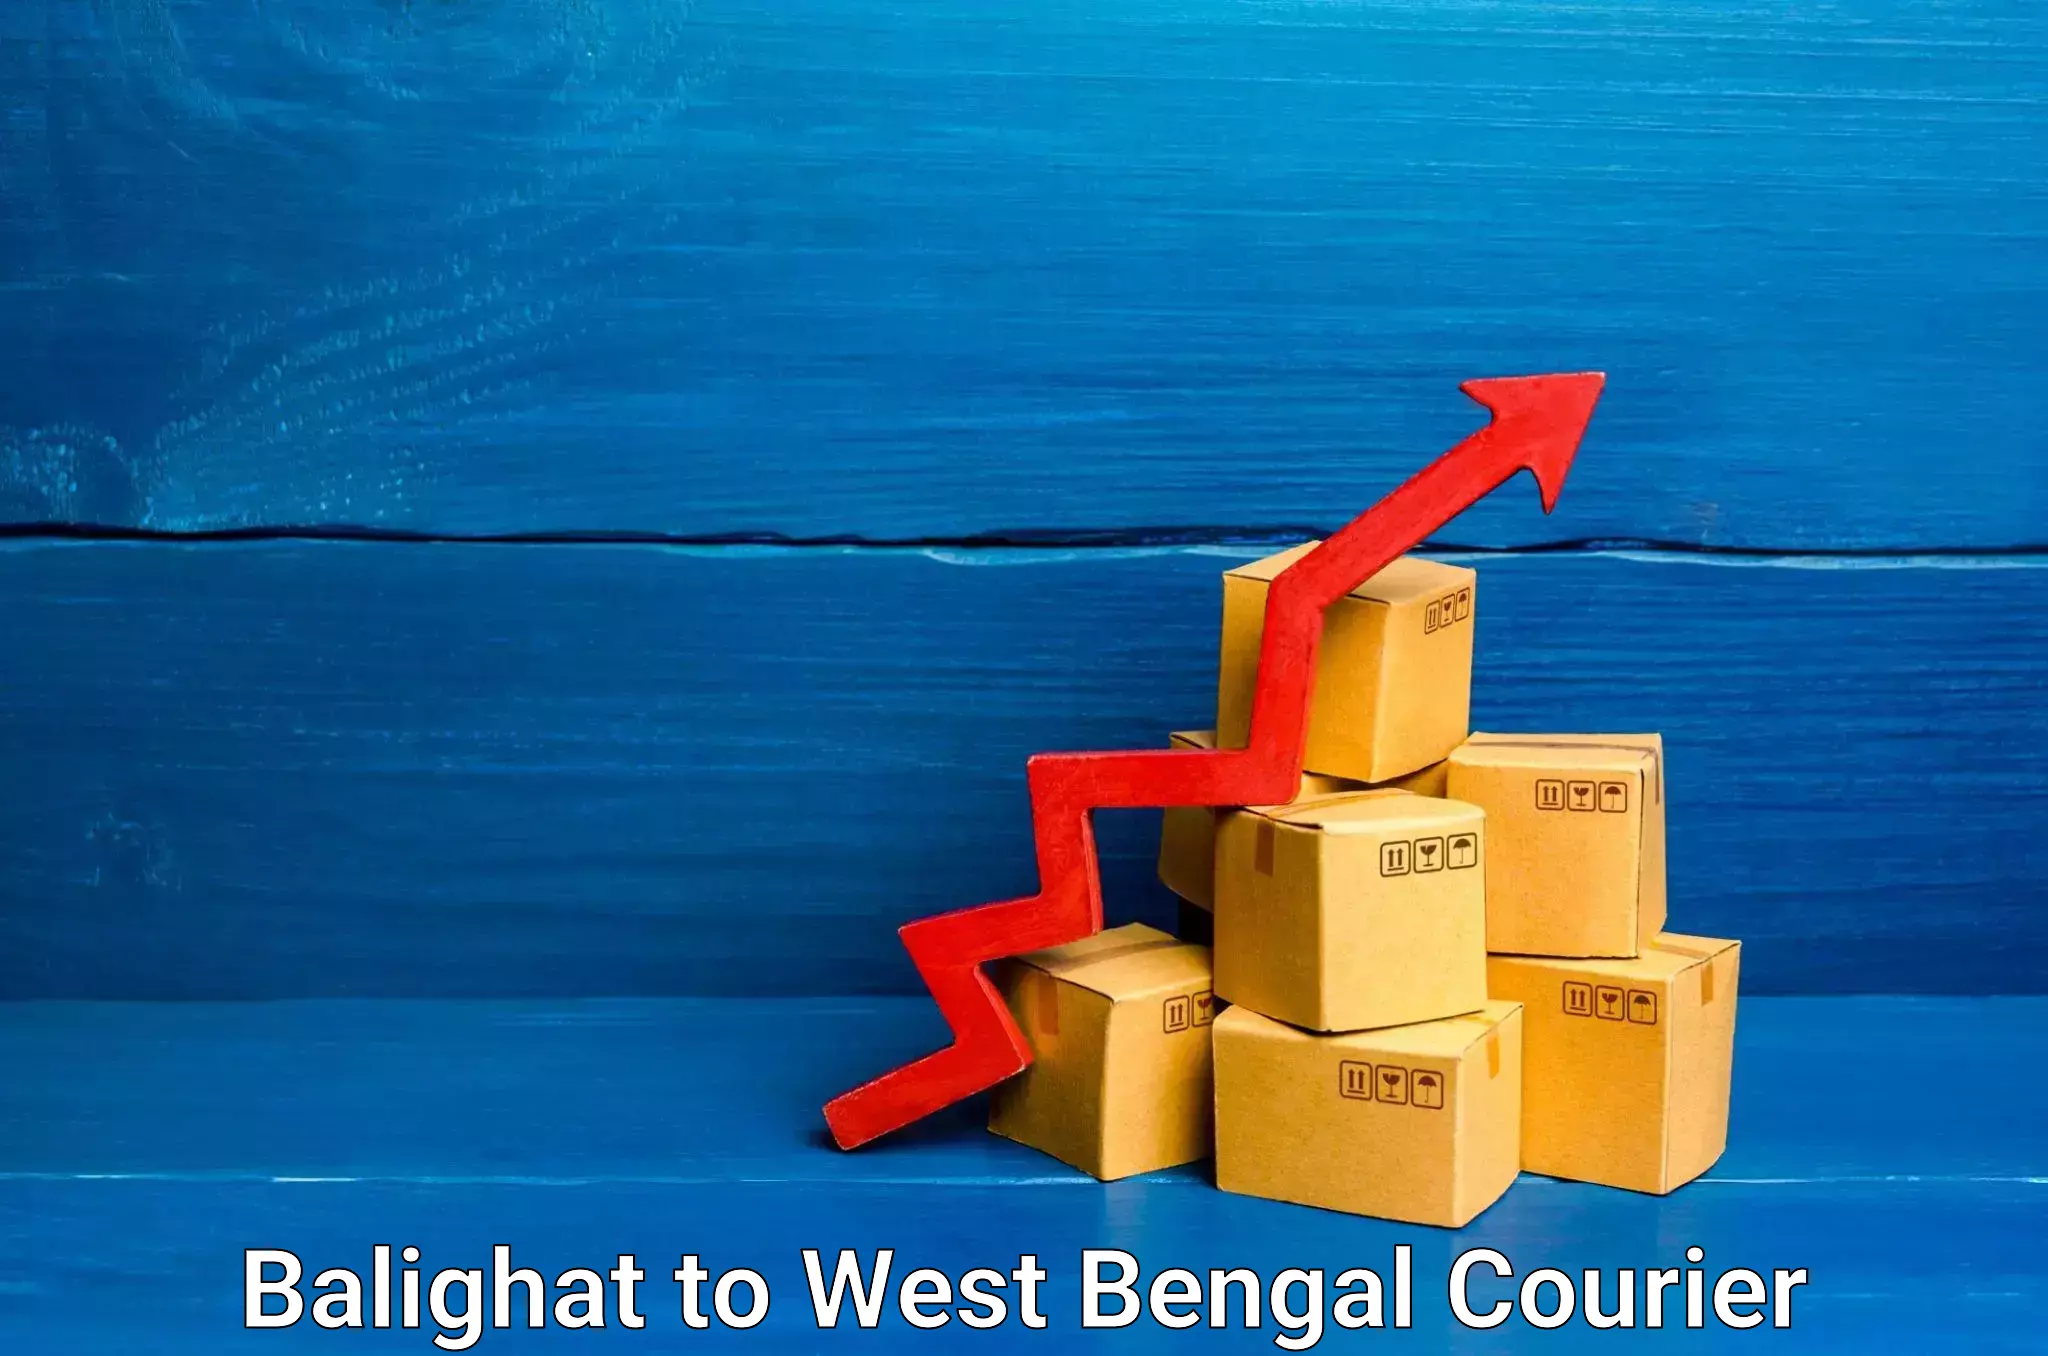 Express logistics providers Balighat to West Bengal